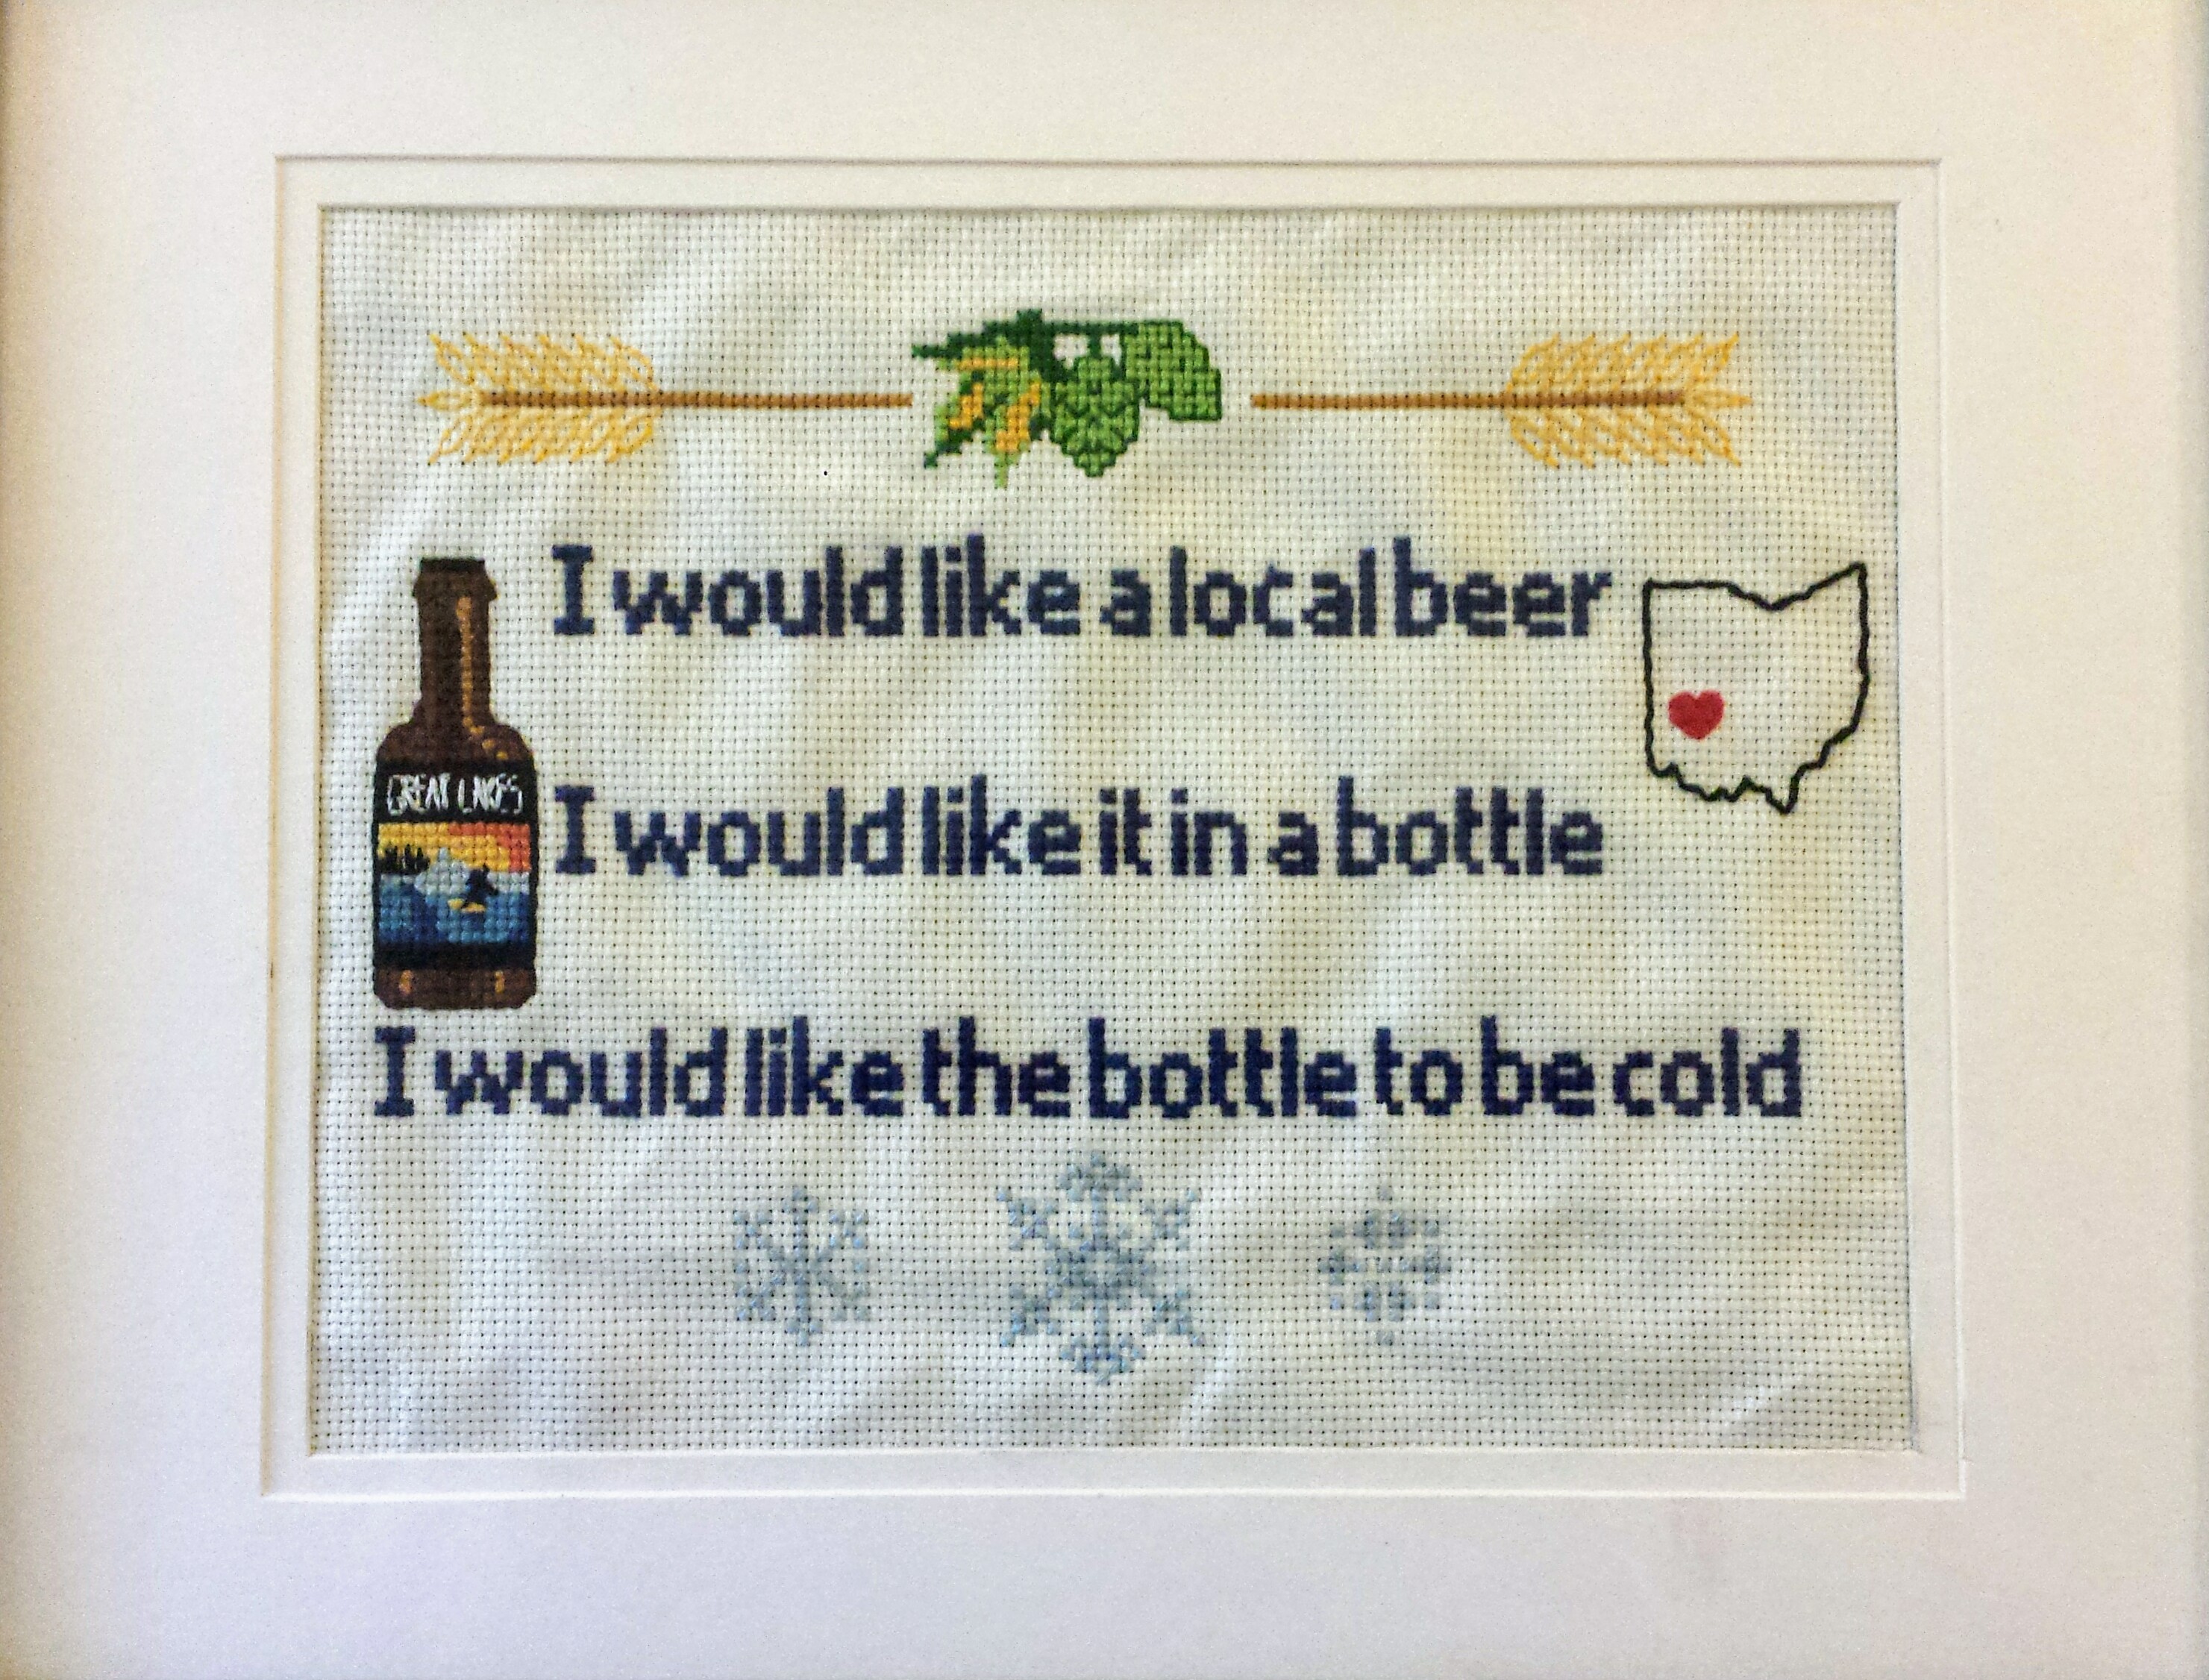 needlework - Iwould alocalbeer m Baum I would it in a bottle I would the bottle to be cold